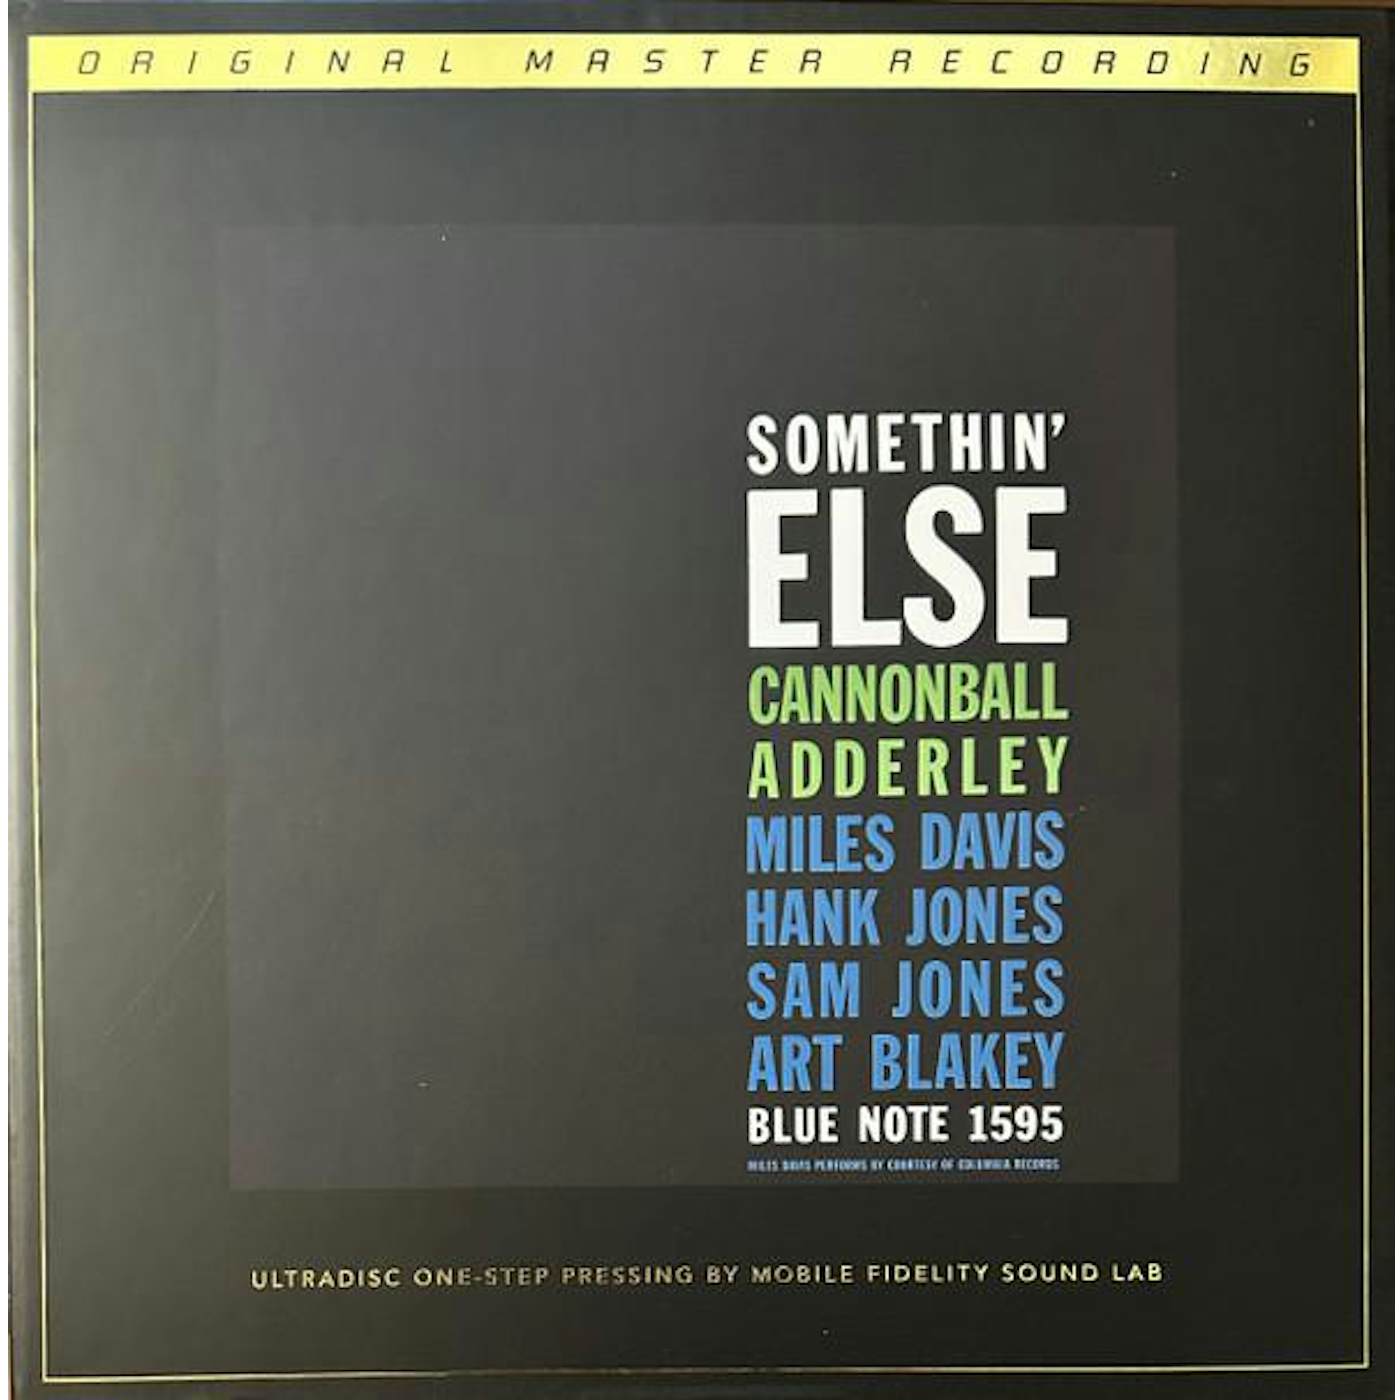 Cannonball Adderley SOMETHIN' ELSE (2LP/180G/45RPM SUPERVINYL ULTRADISC ONE-STEP/ORIGINAL MASTERS/LIMITED/NUMBERED) Vinyl Record